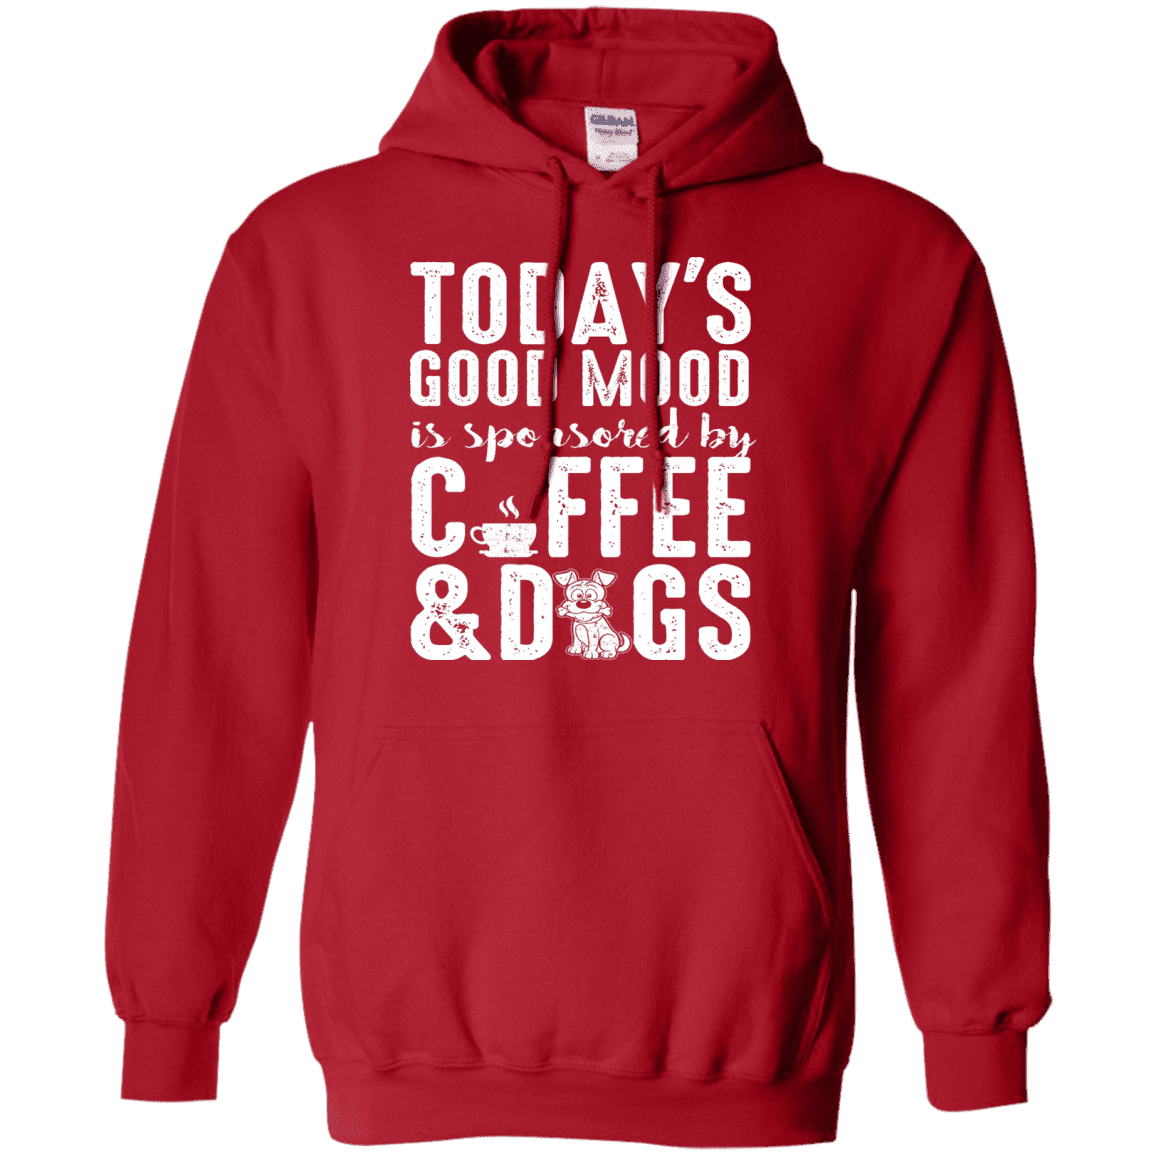 Today's Good Mood Coffee & Dogs - Hoodie – Rescuers Club